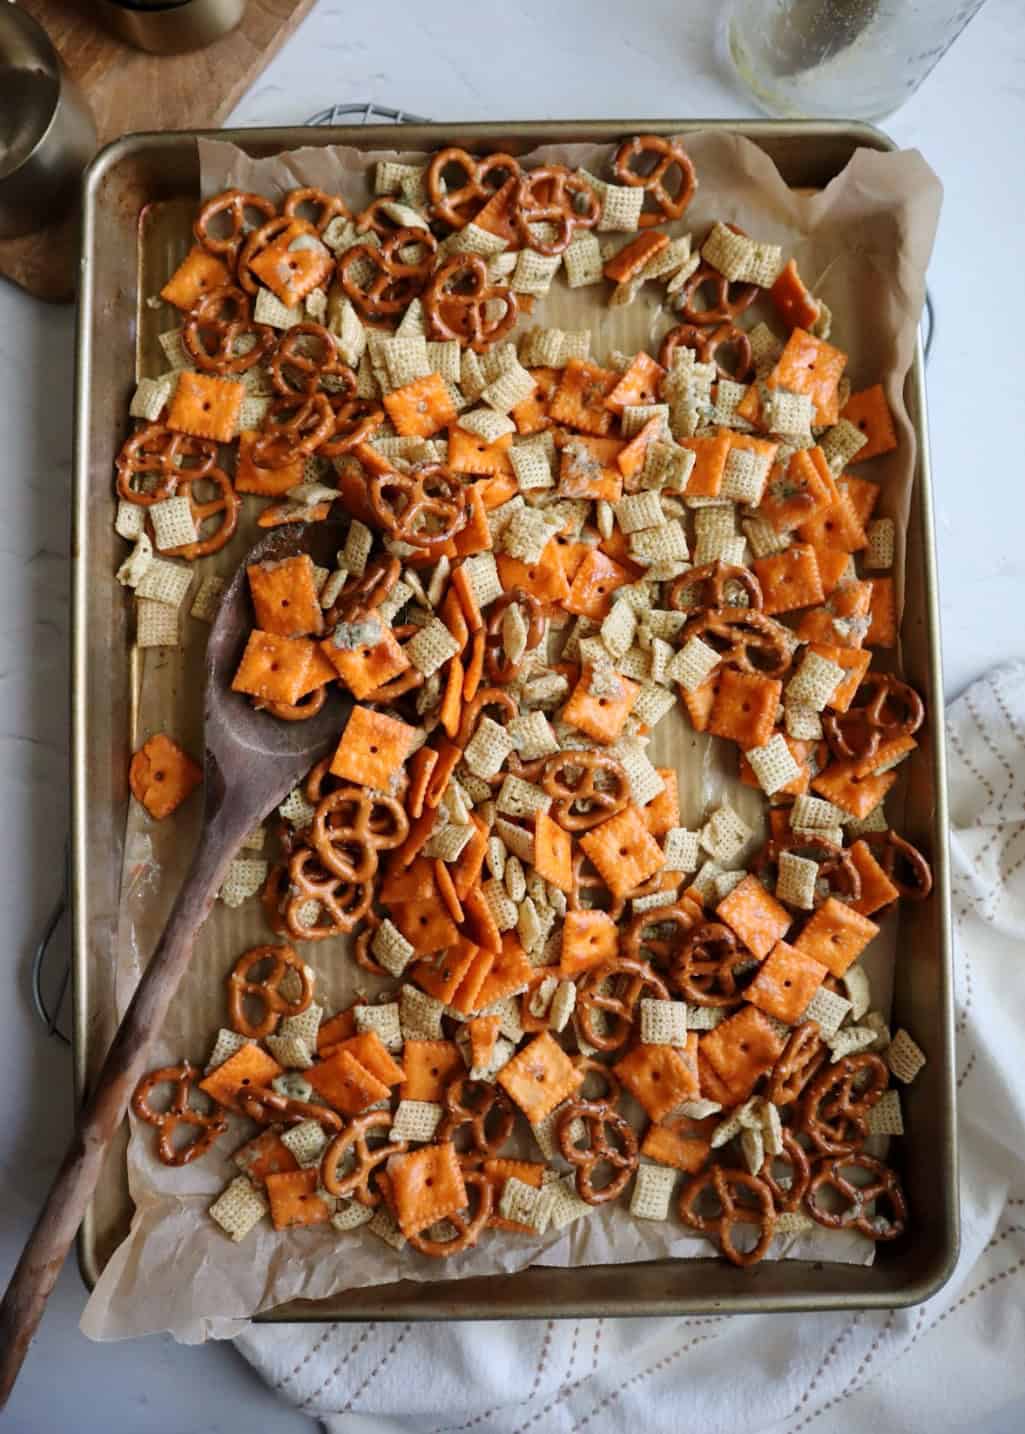 ranch snack mix before baking on a baking tray